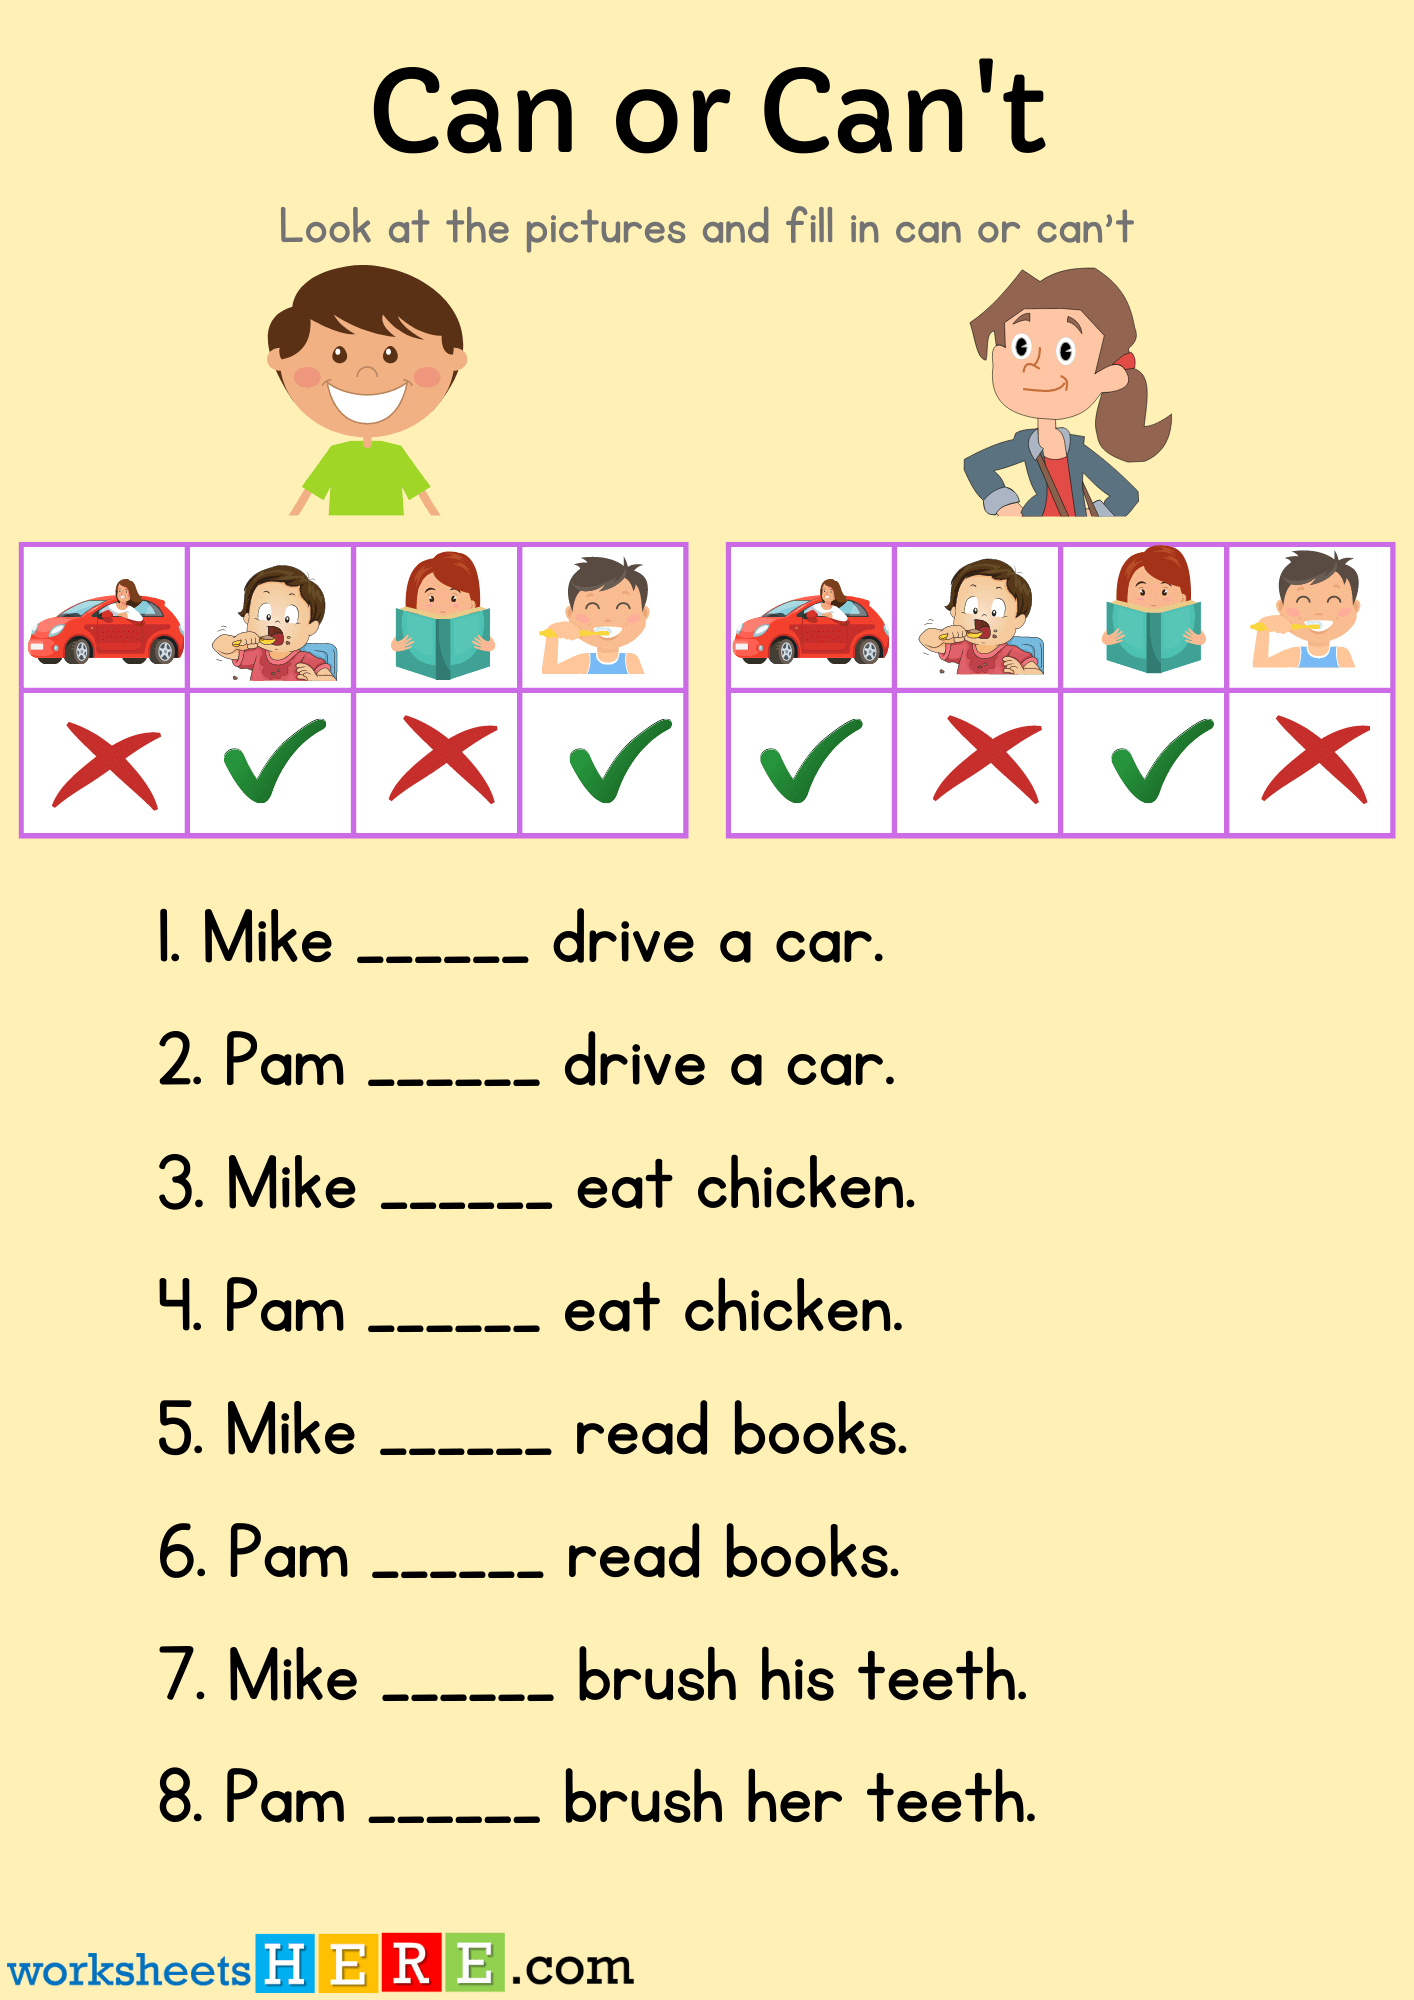 Can or Can’t Exercises, Answers with Pictures Examples PDF Worksheet For Kids